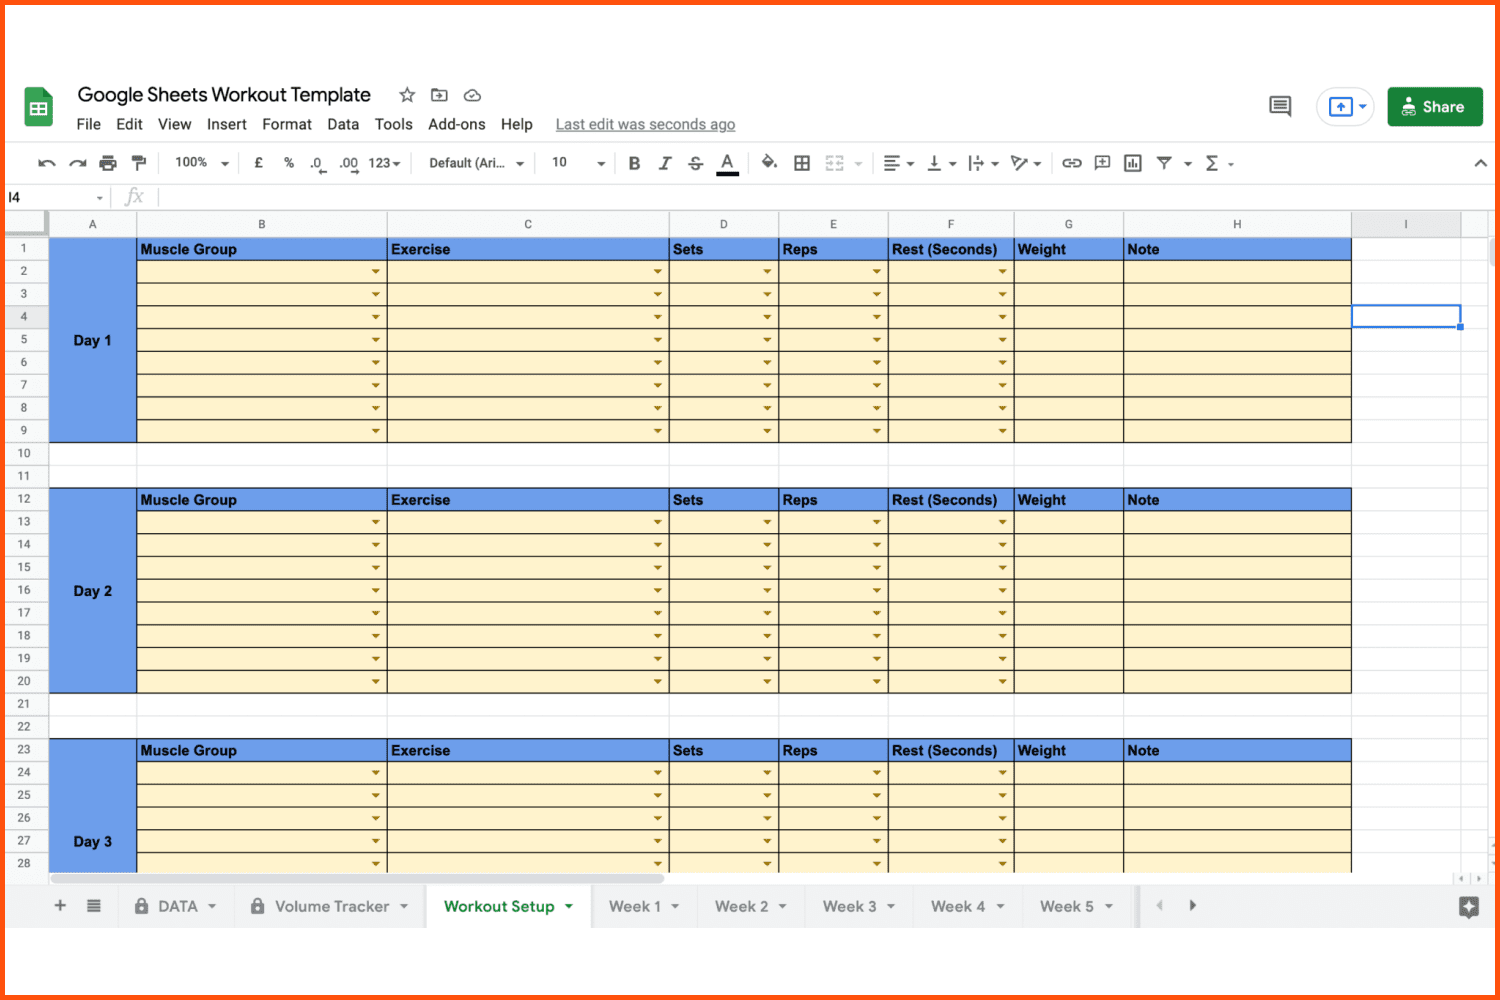 10 Best Free Google Sheets Workout Planner Templates for 2022 (2022)